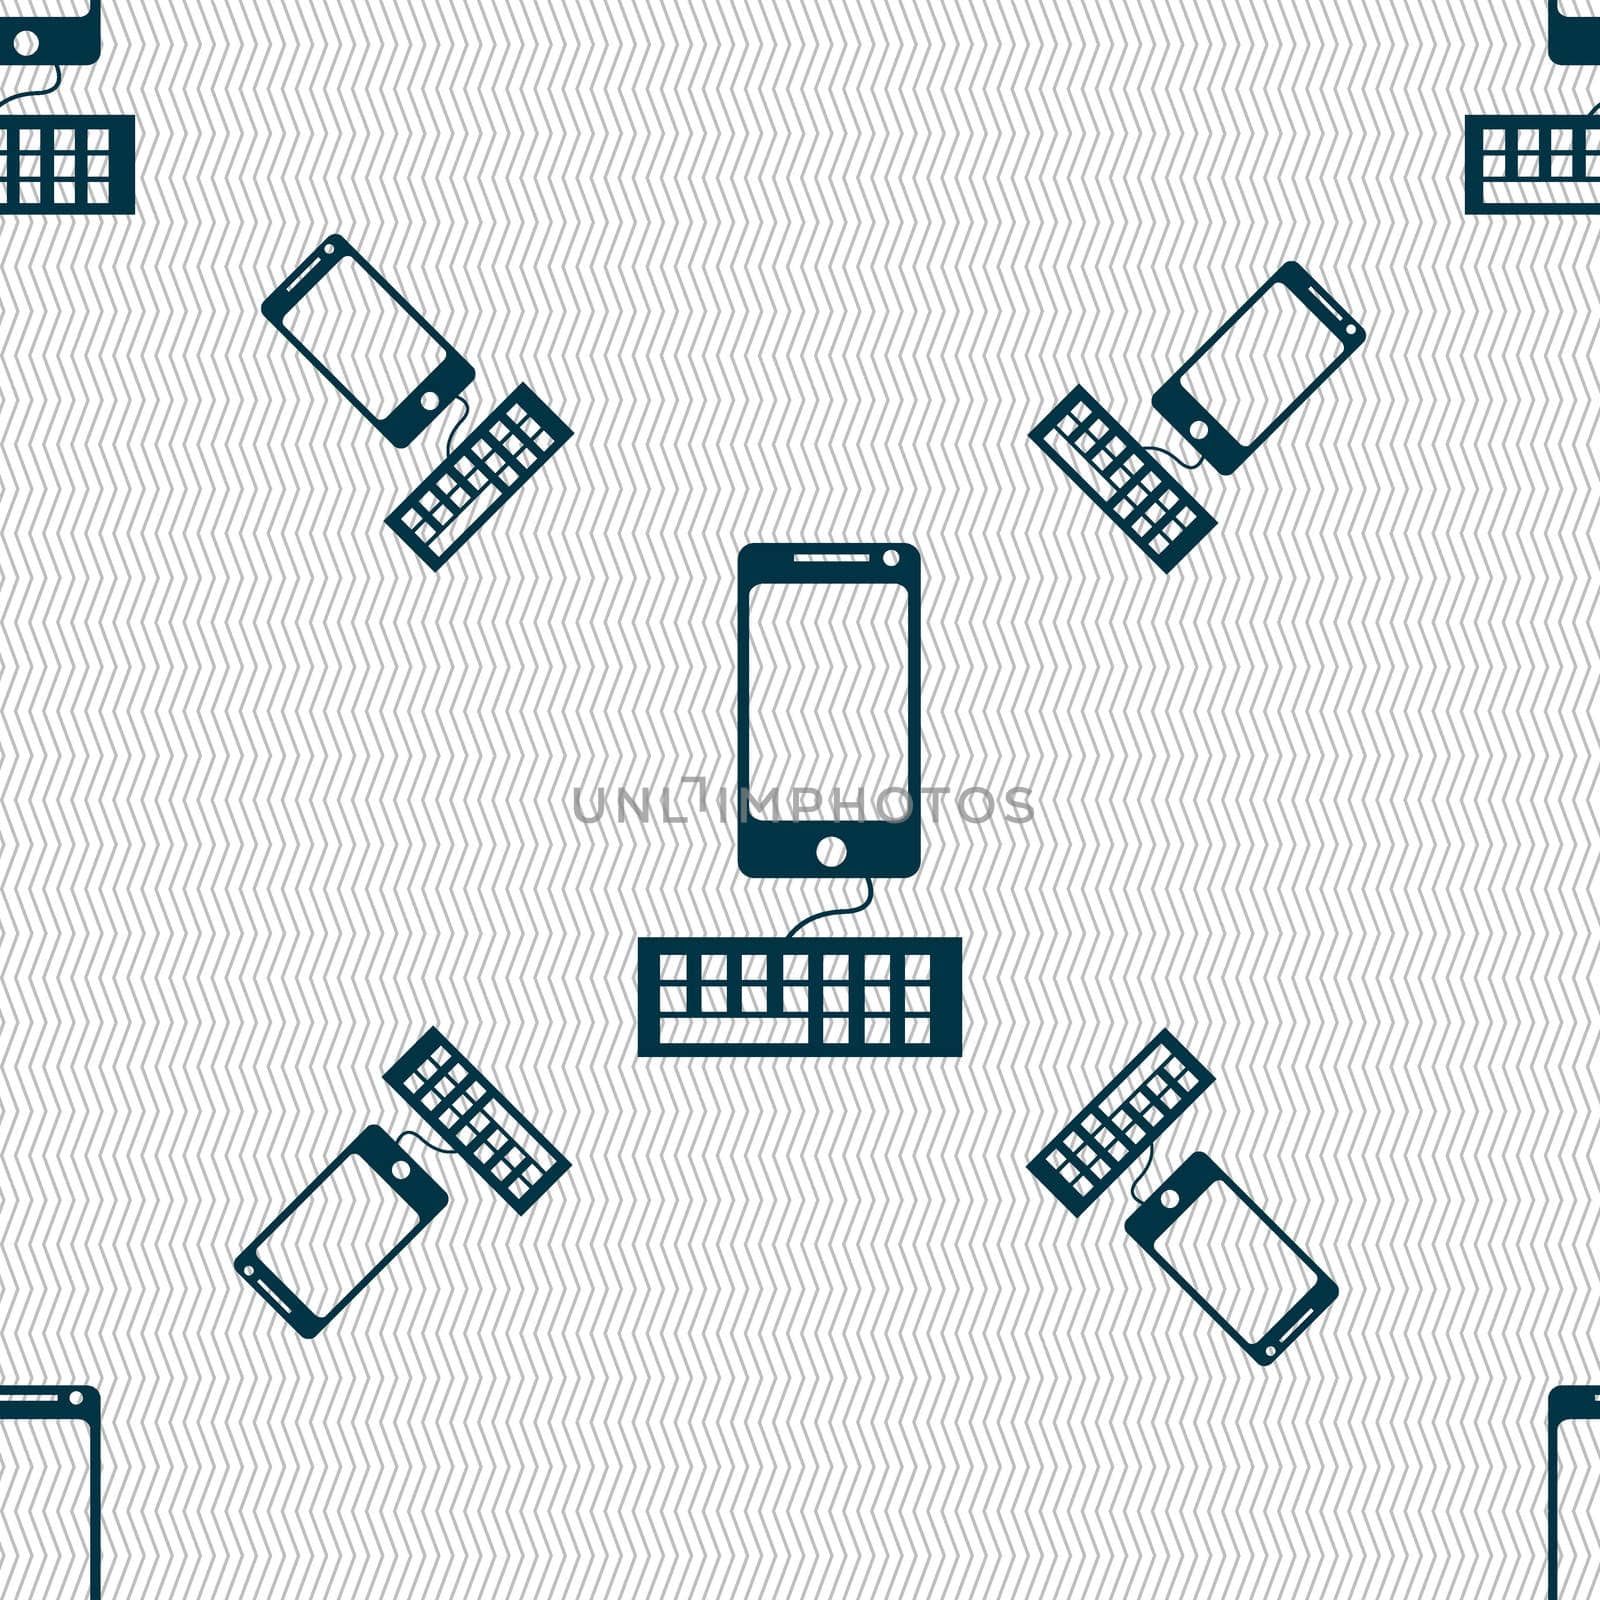 Computer keyboard and smatphone Icon. Seamless pattern with geometric texture. illustration